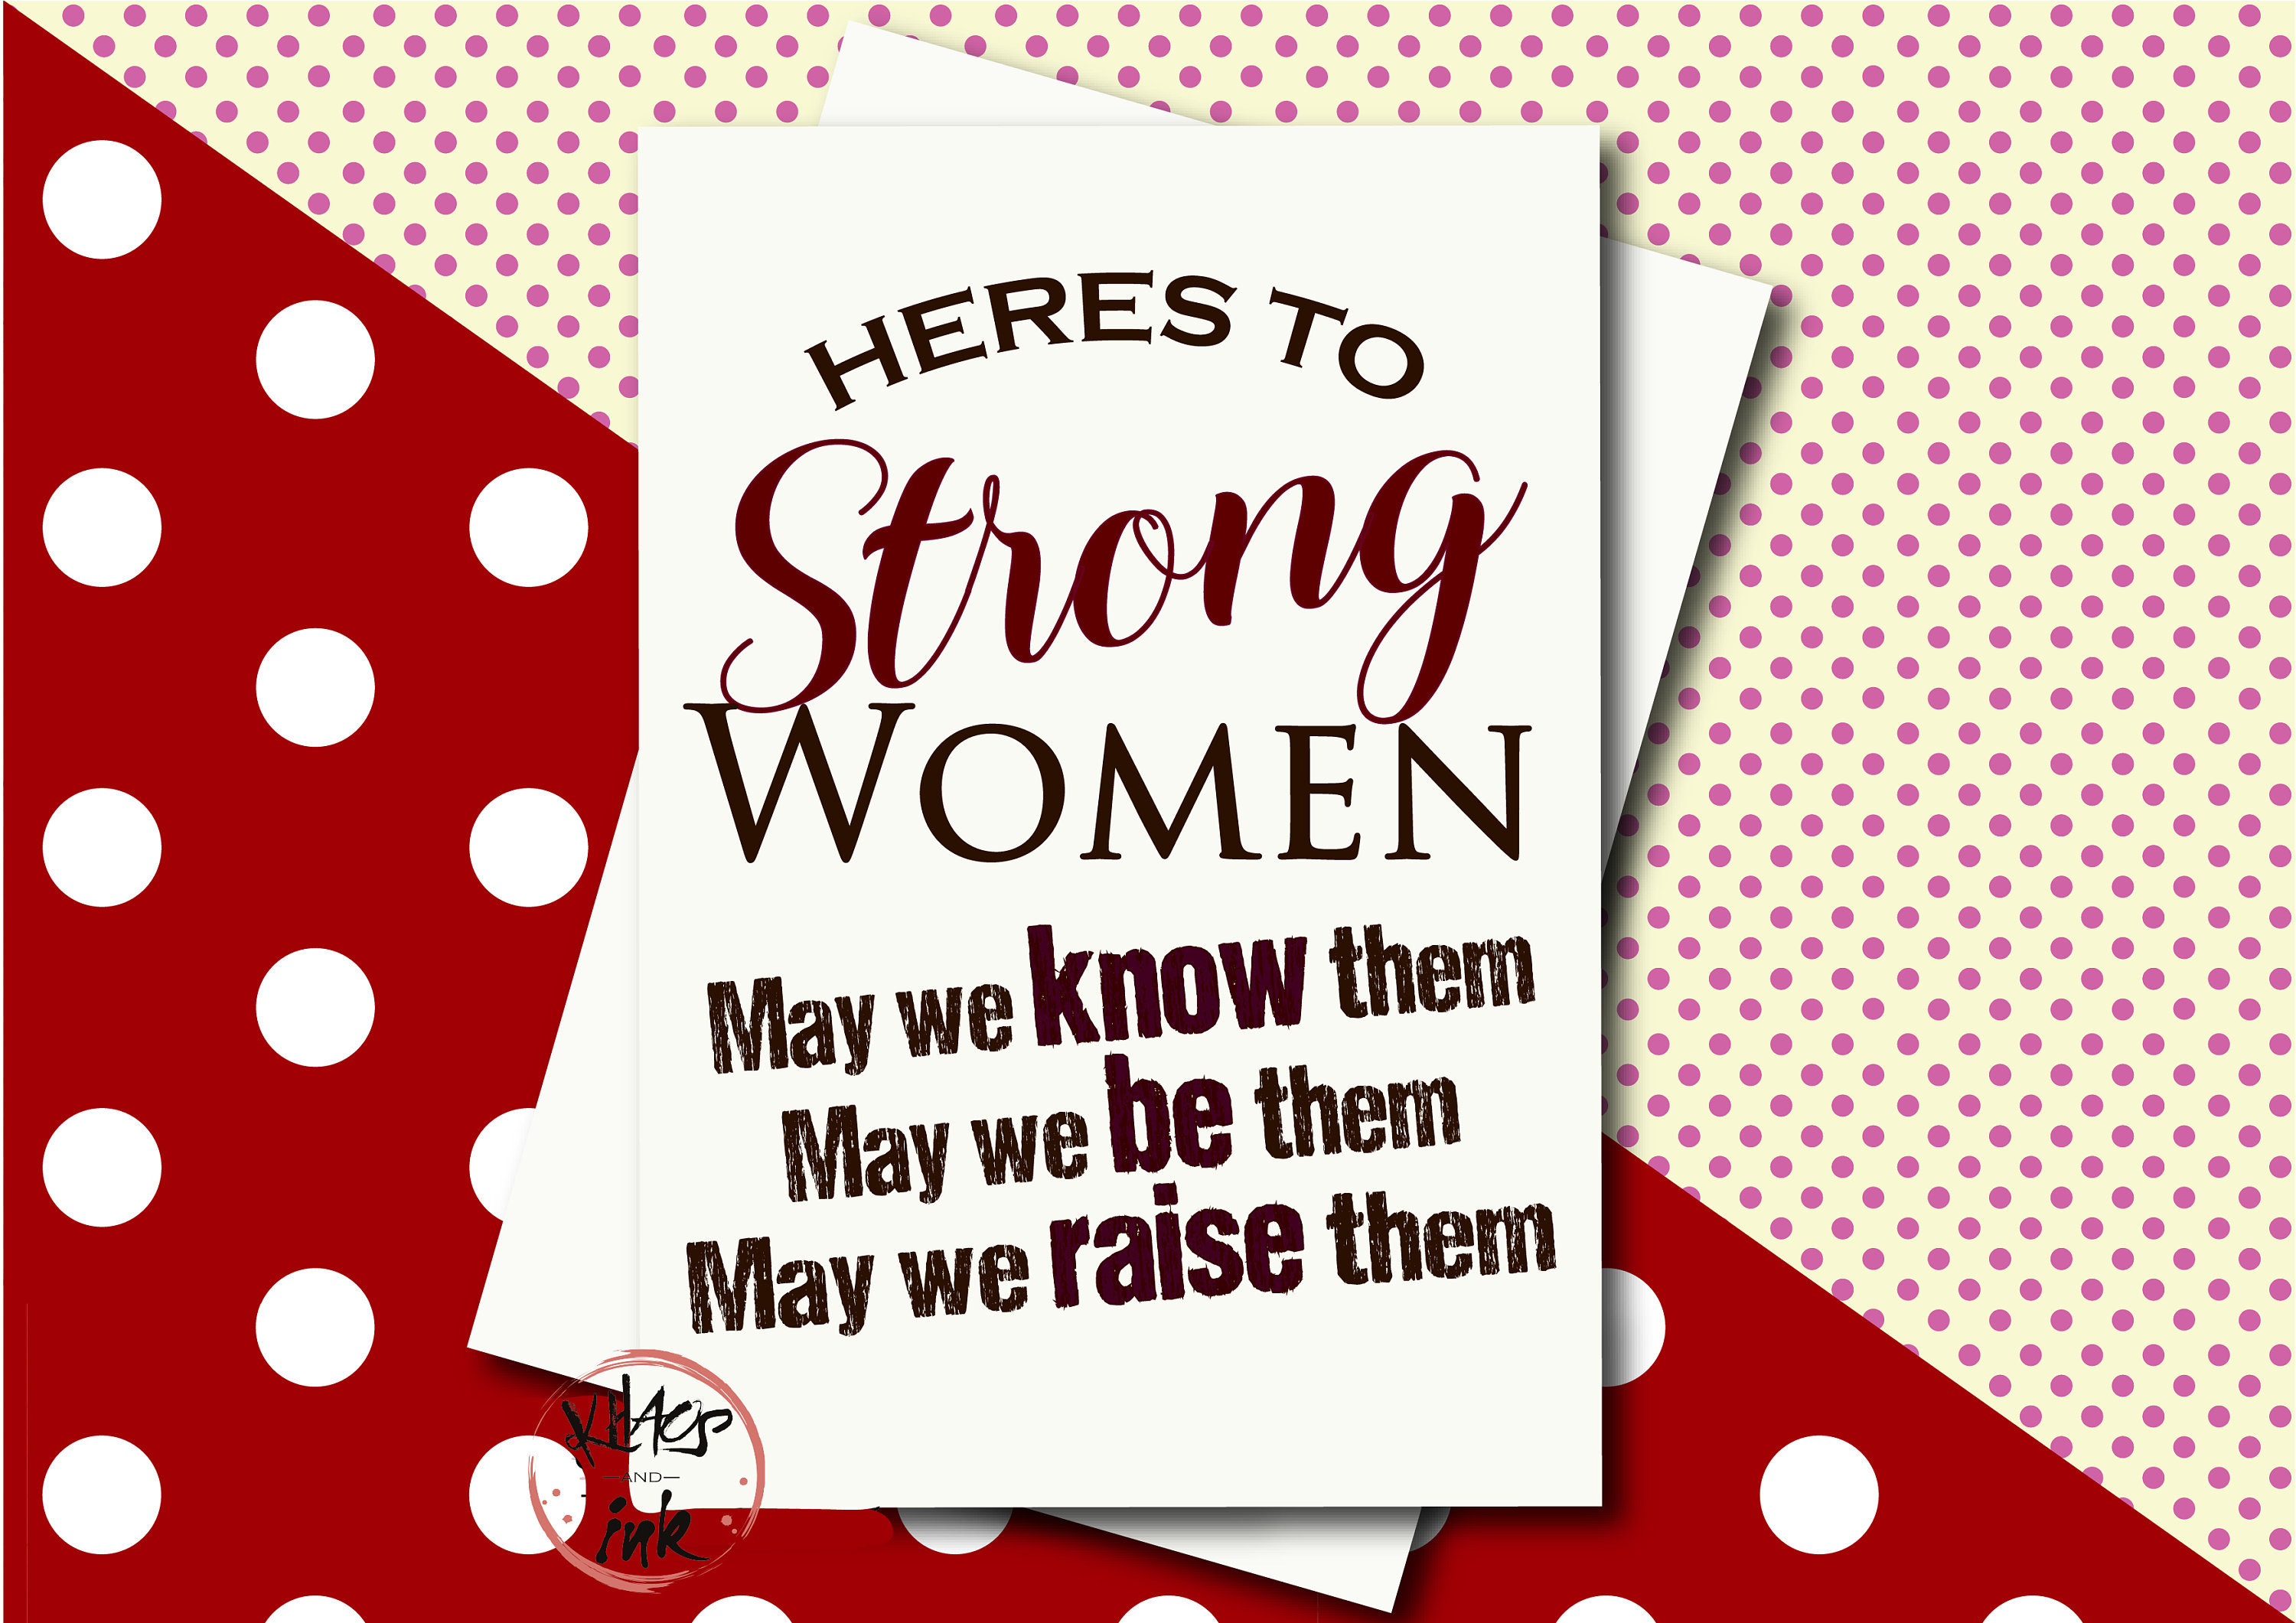 2. "Strong women, may we know them, may we be them, may we raise them" - wide 6